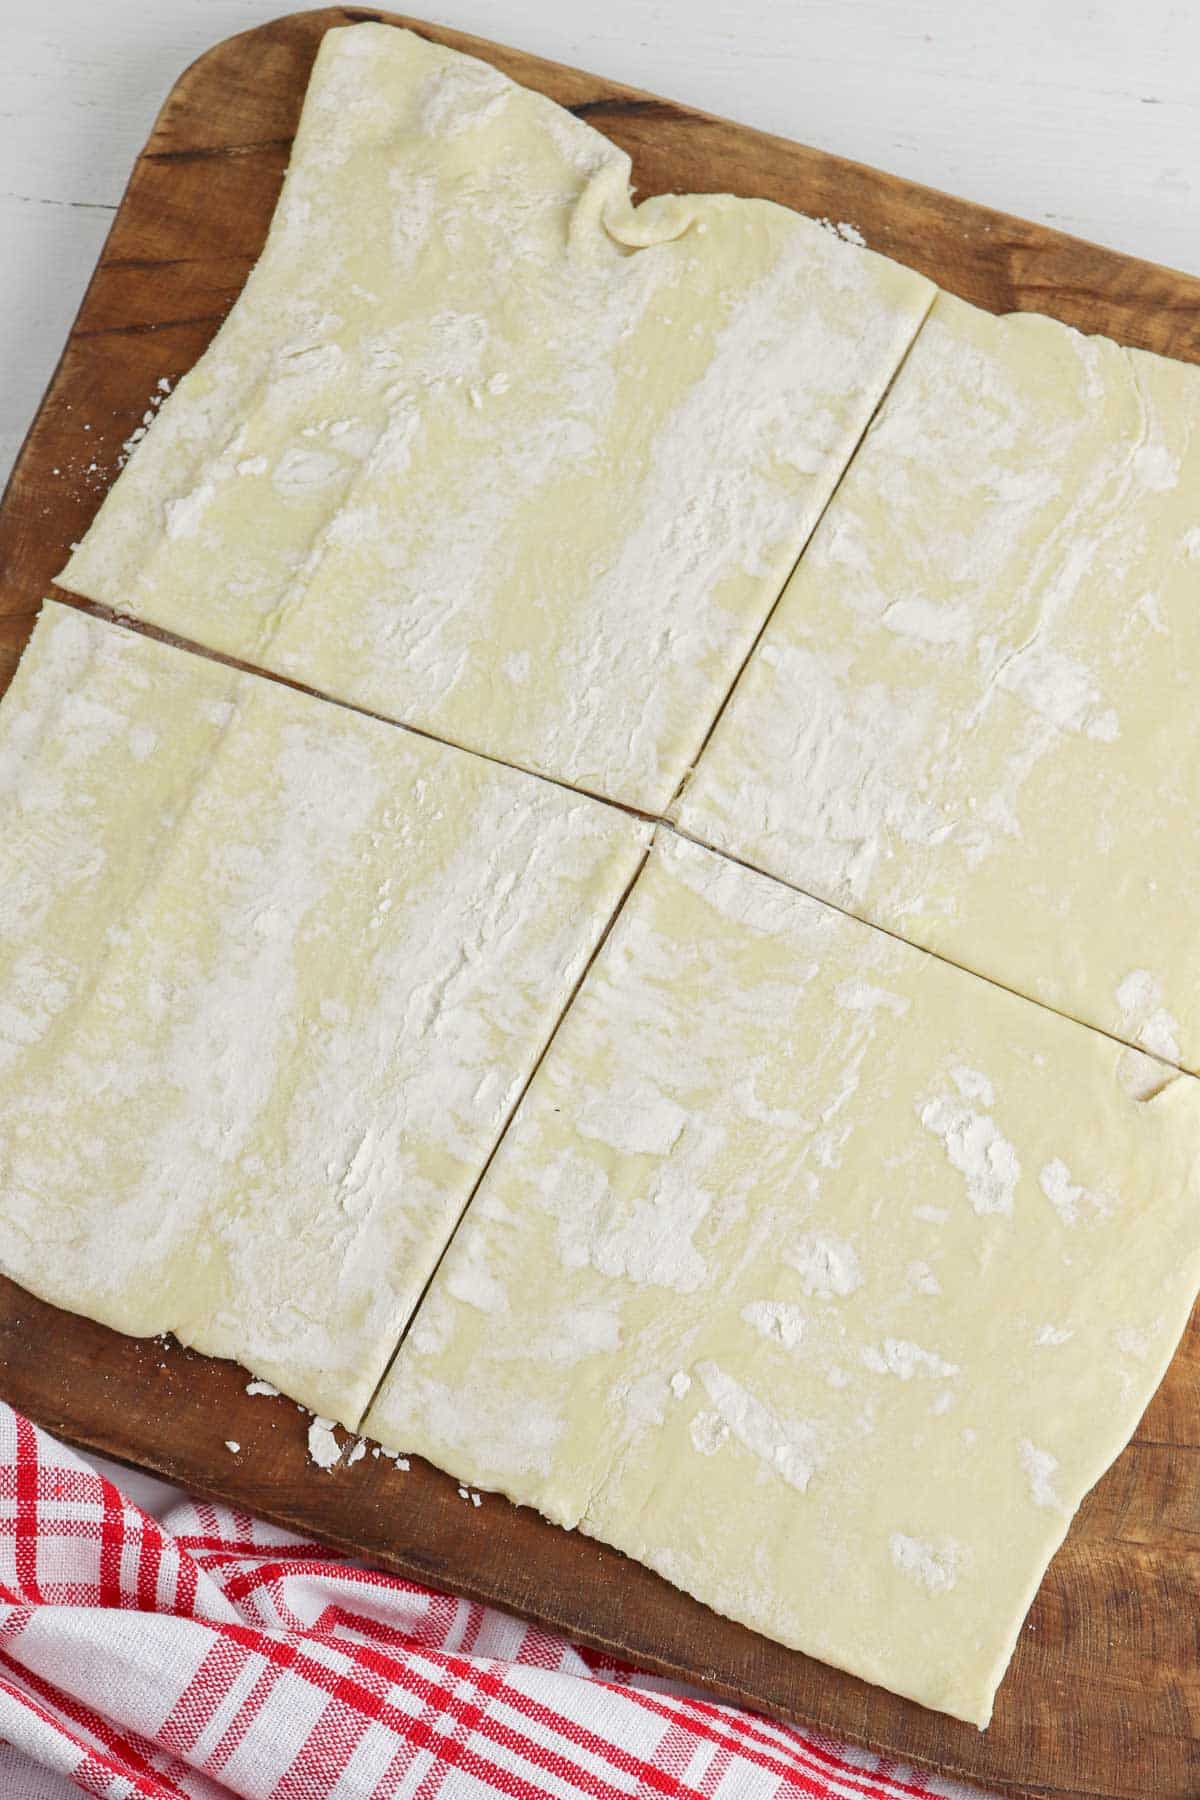 puff pastry dough cut into 4 equal squares on a wood cutting board.